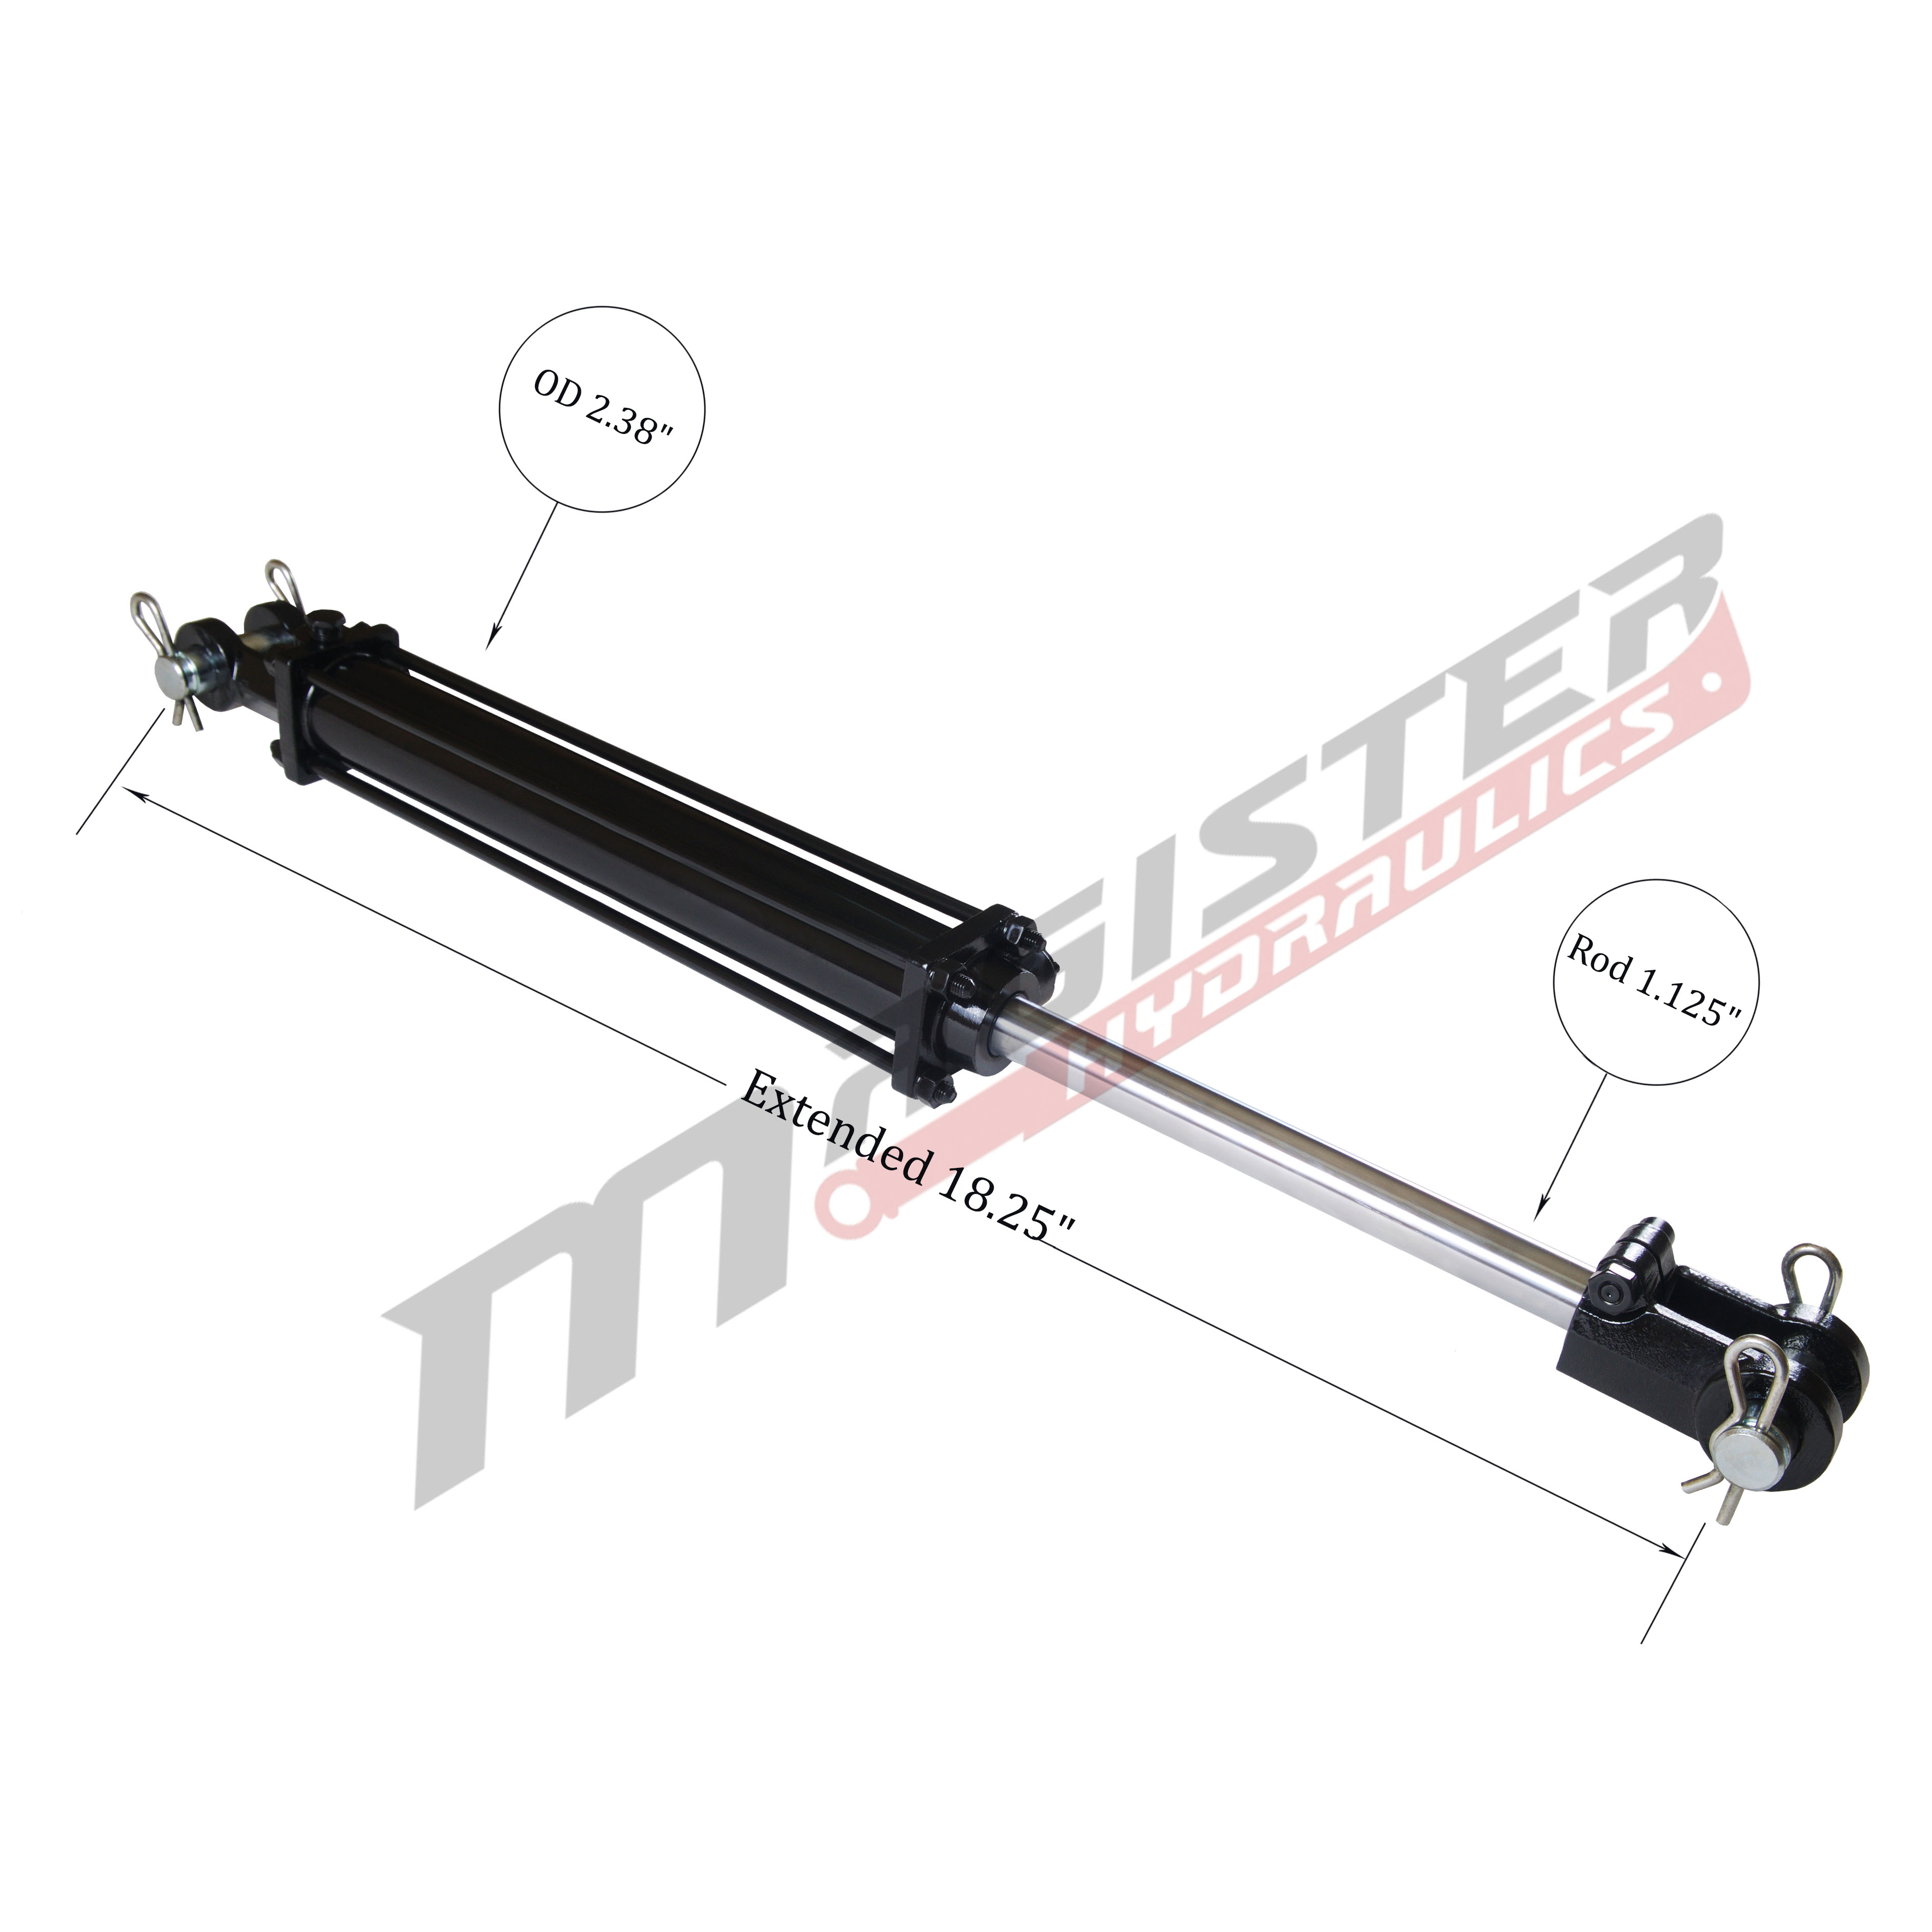 2 bore x 4 stroke hydraulic cylinder, tie rod double acting cylinder | Magister Hydraulics